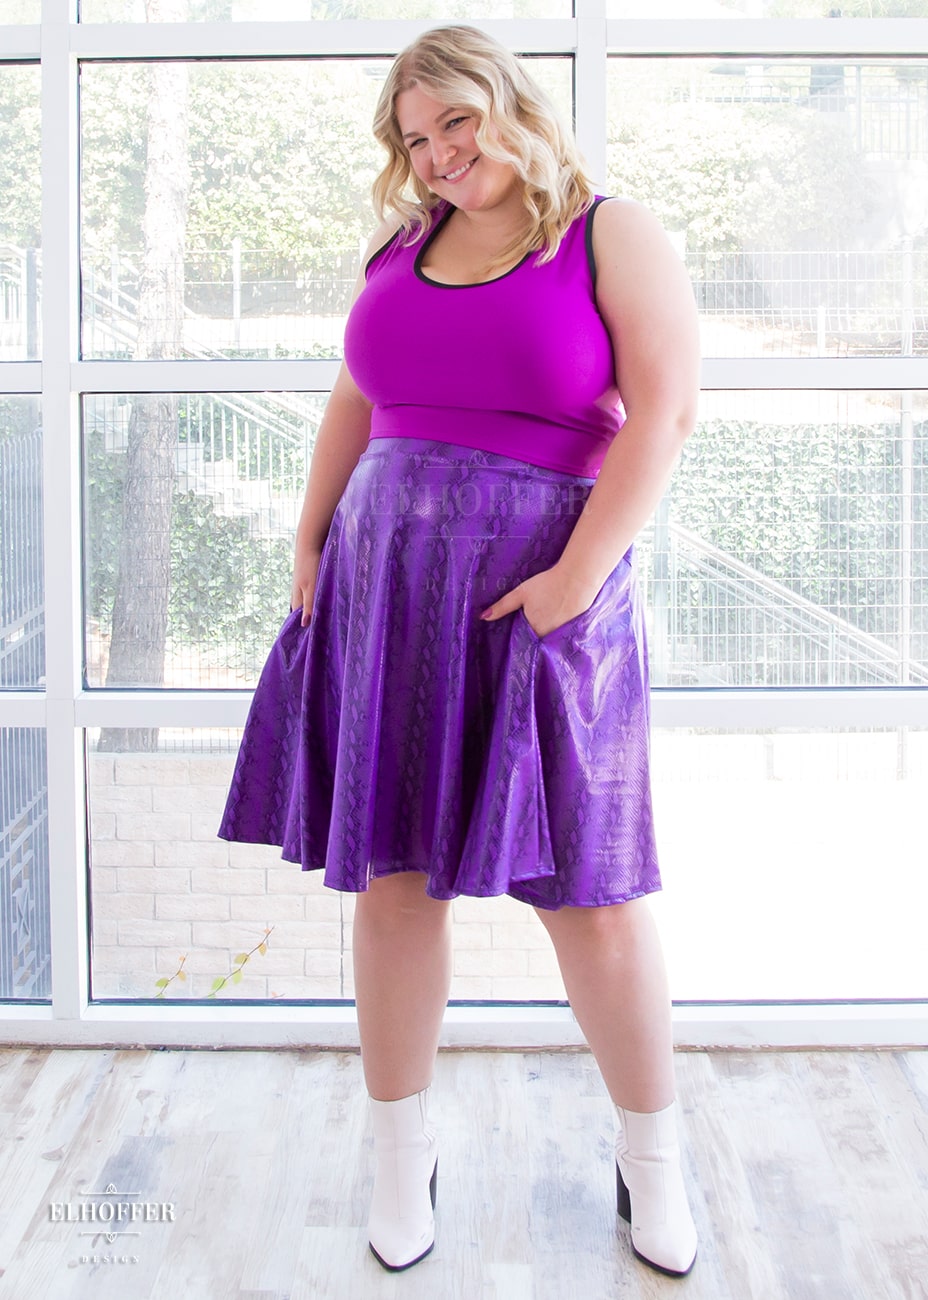 Sarah, a fair skinned size XL model with long blonde hair, wears a high-waisted knee length full skirt with a fitted matching waistband encased with elastic in our purple croki print. The purple croki print is a bright shiny purple snake skin pattern with vertical stripes.